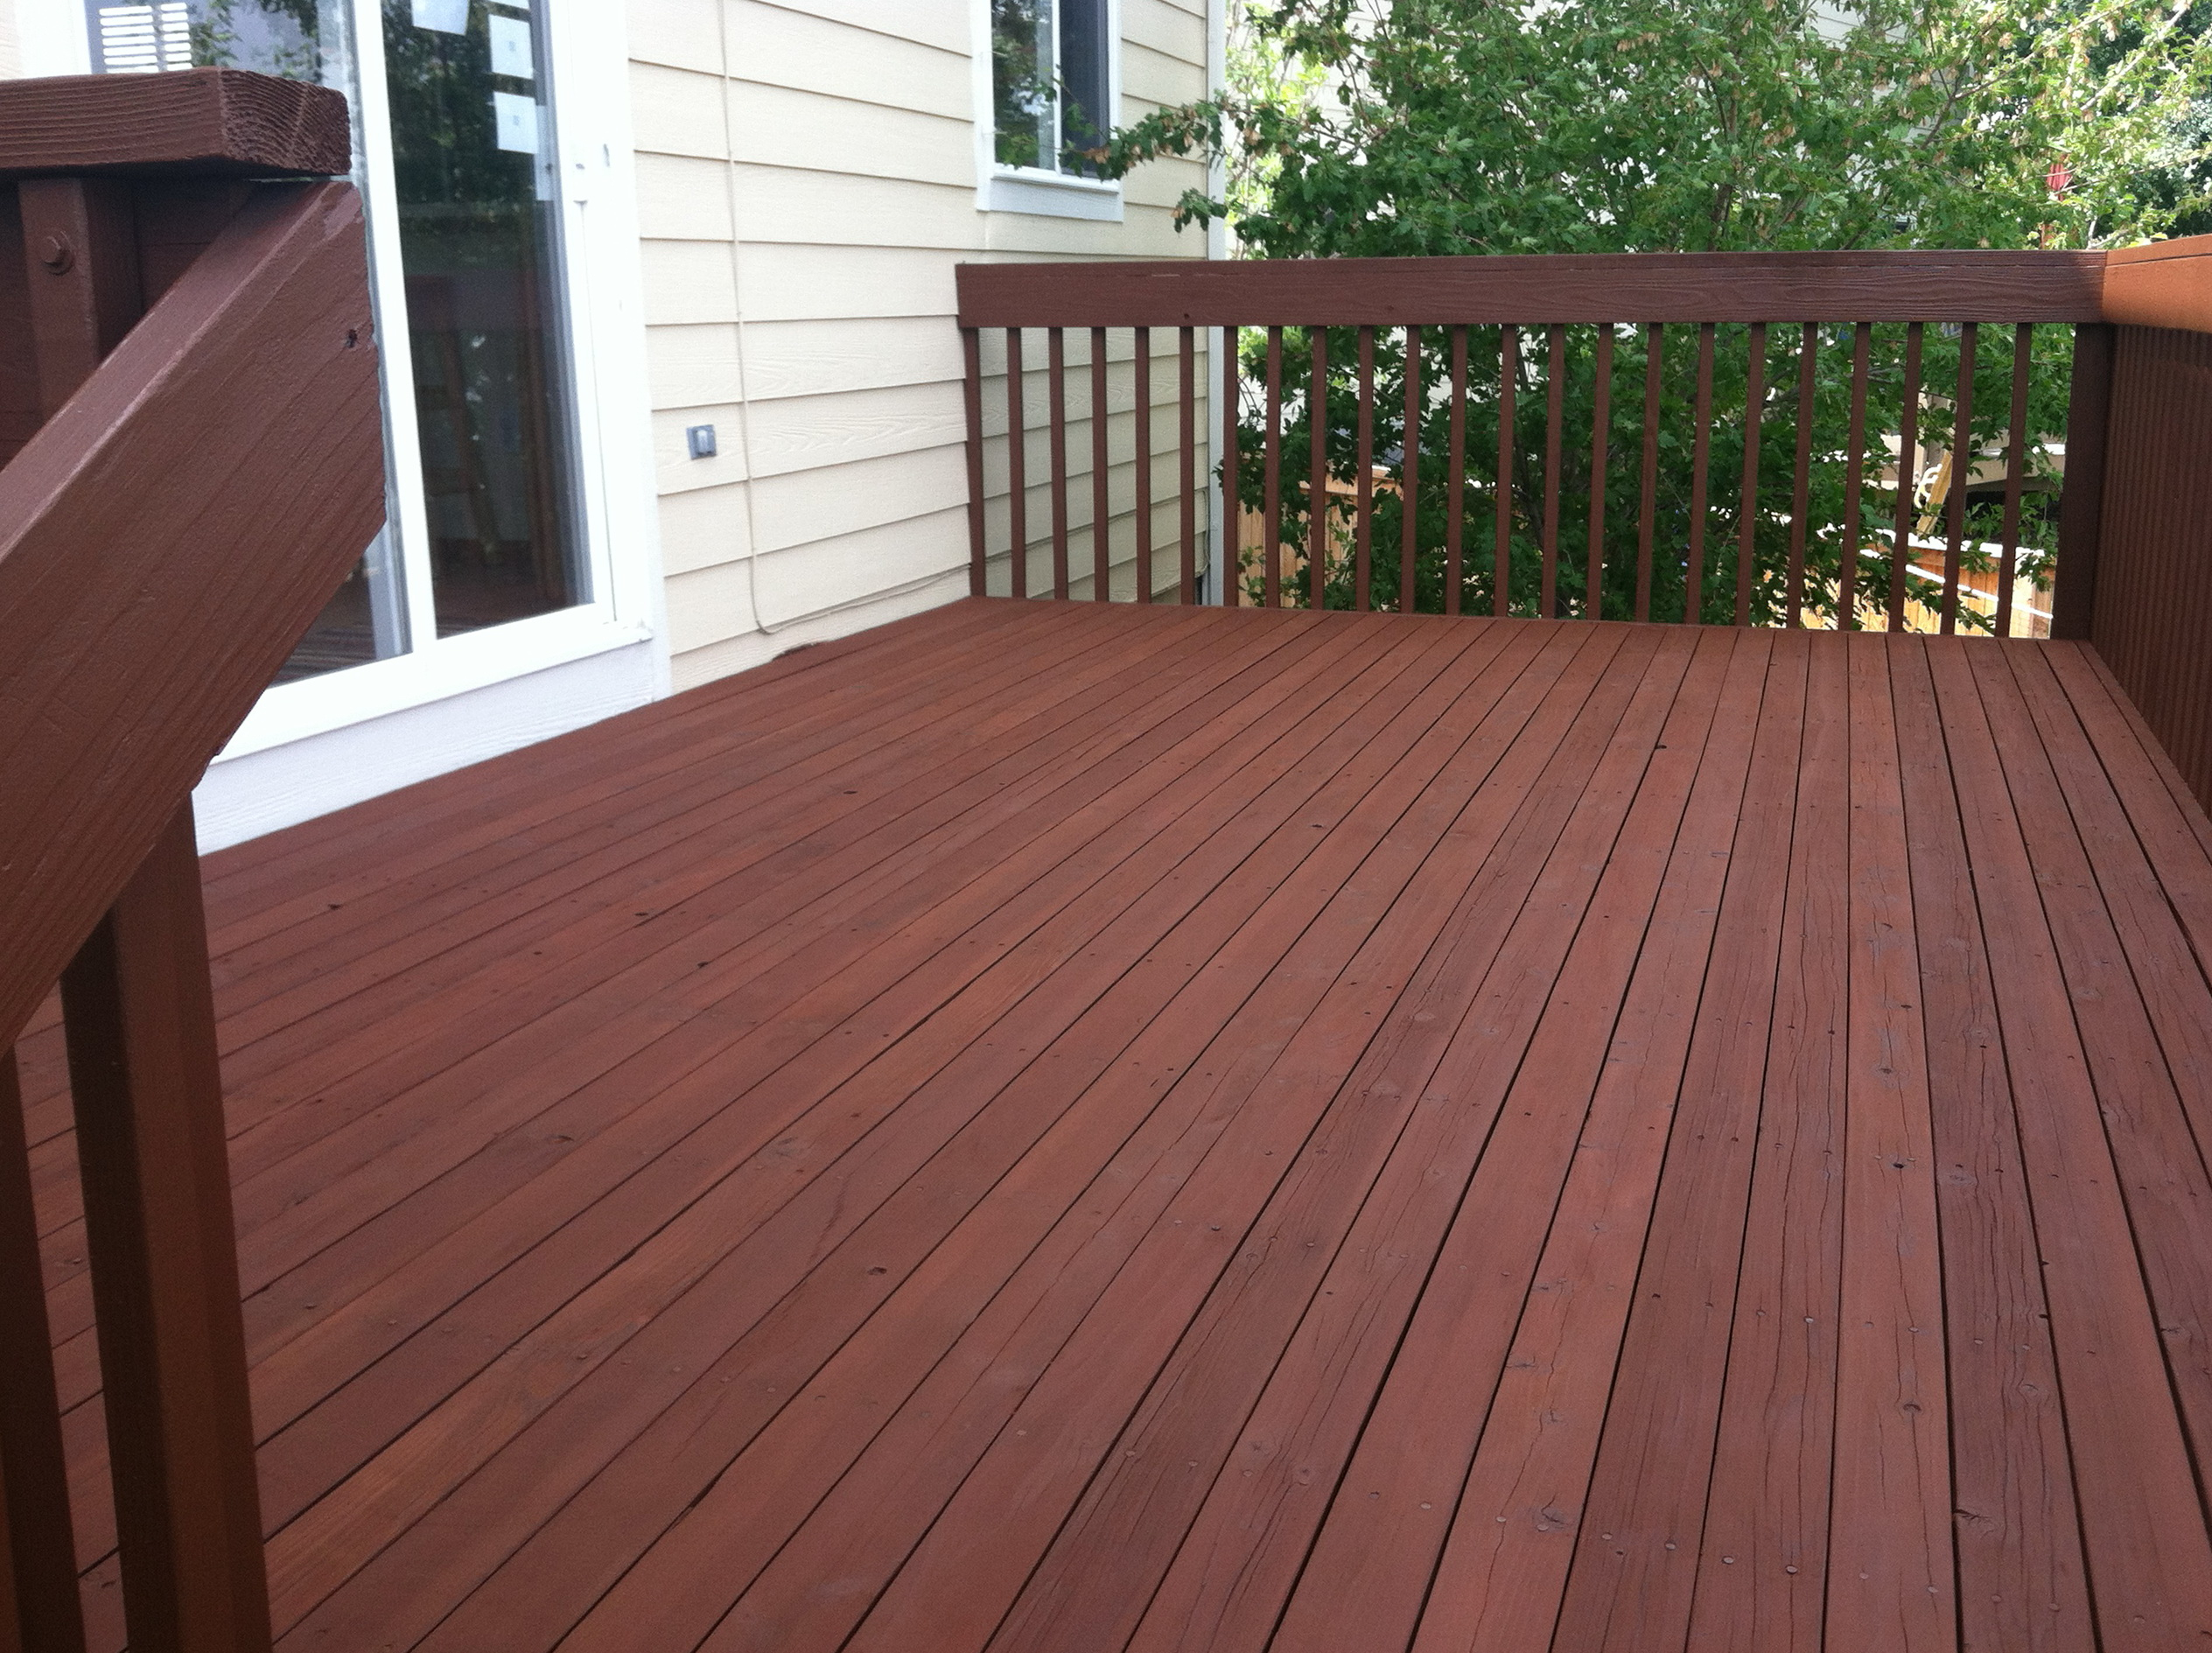 Semi Solid Deck Stain Home Design Ideas within dimensions 2528 X 1889